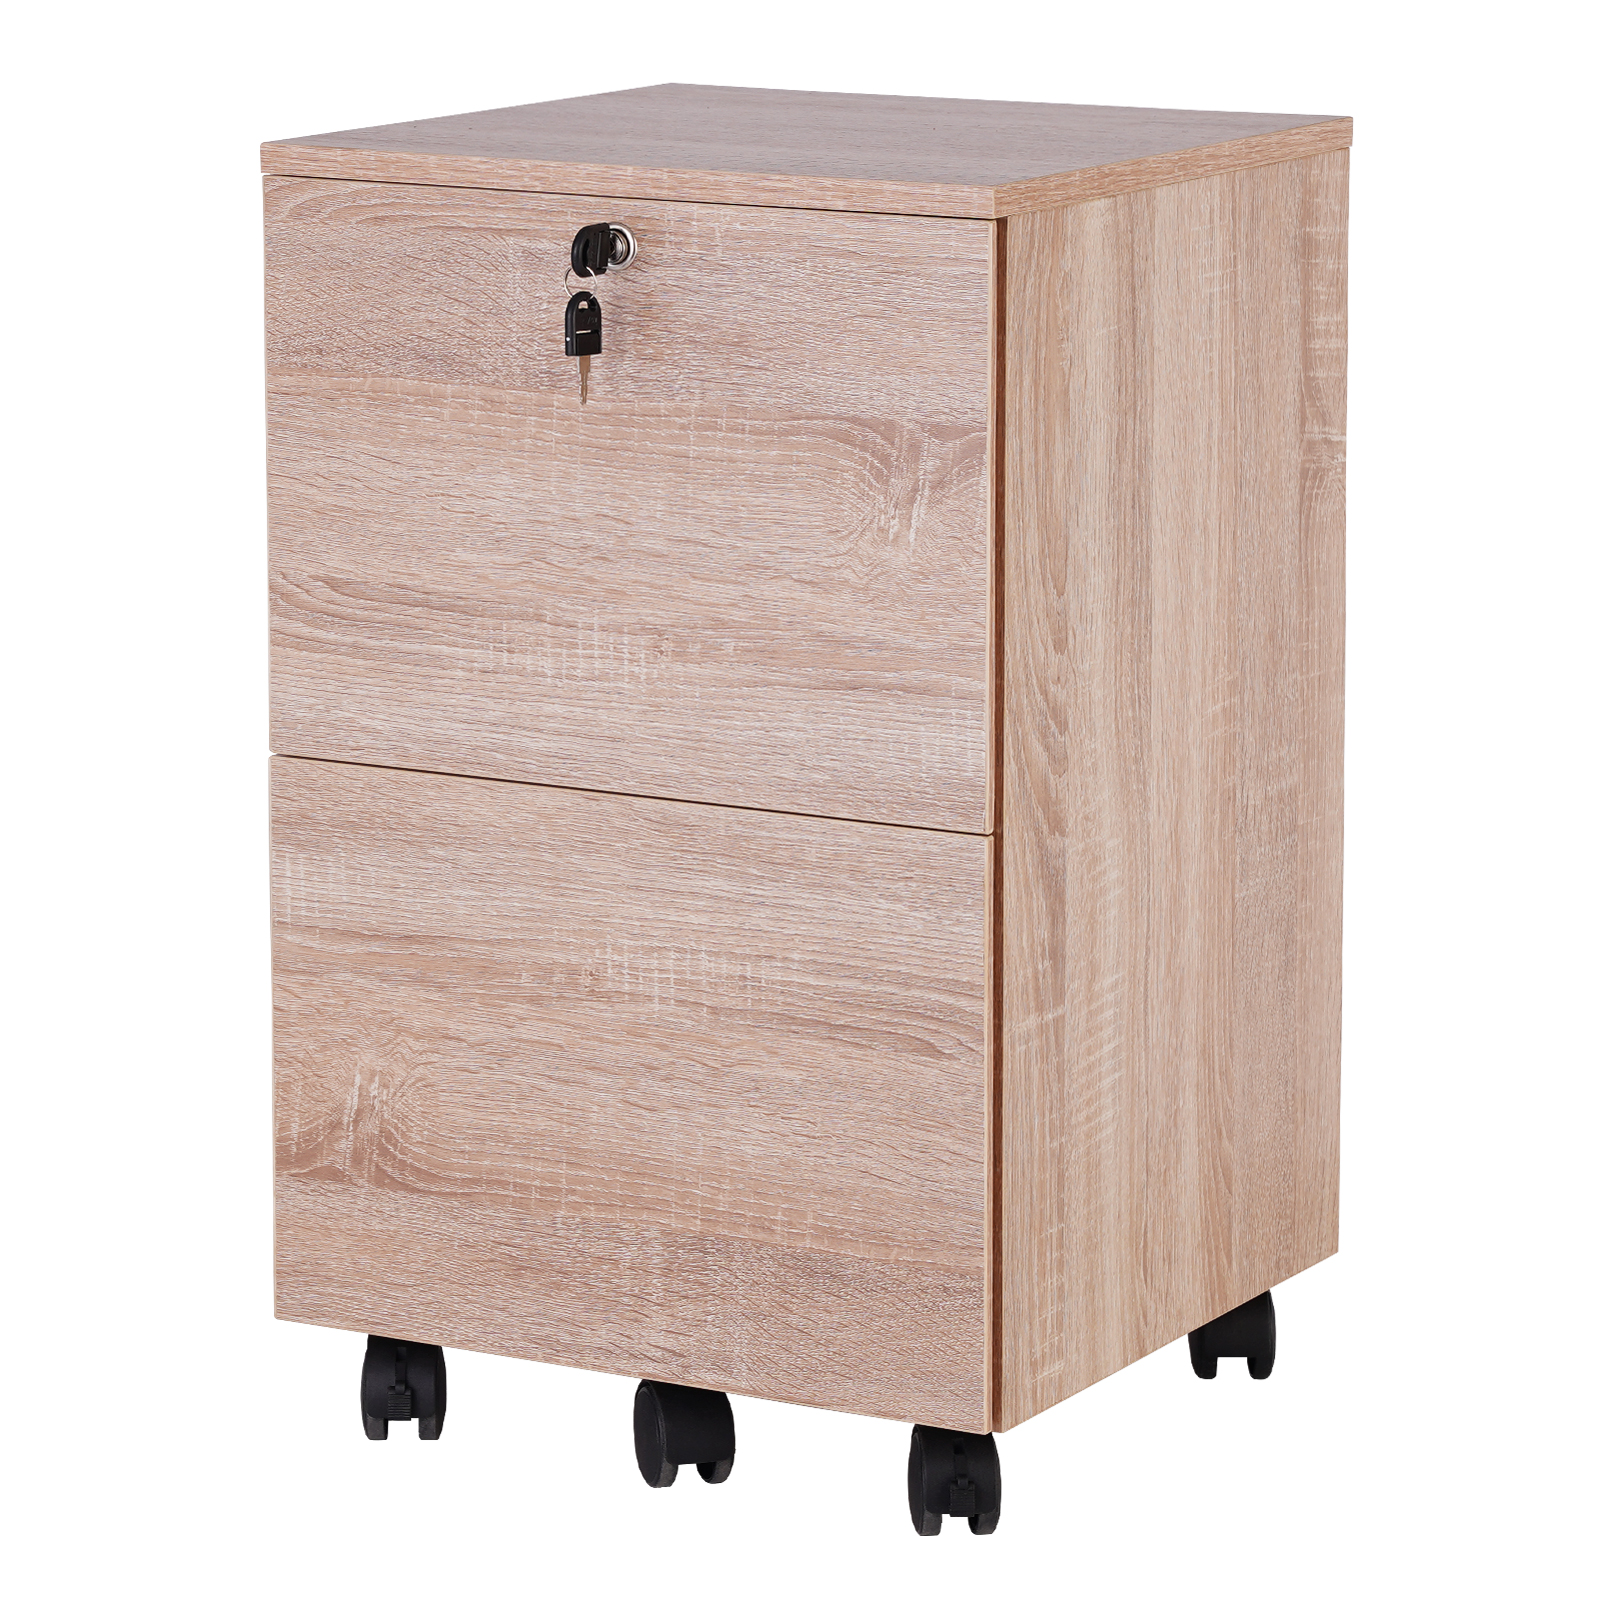 TOPSKY 2 Drawers Wood Mobile File Cabinet for Letter Size Files Fully Assembled Except Casters S-17A